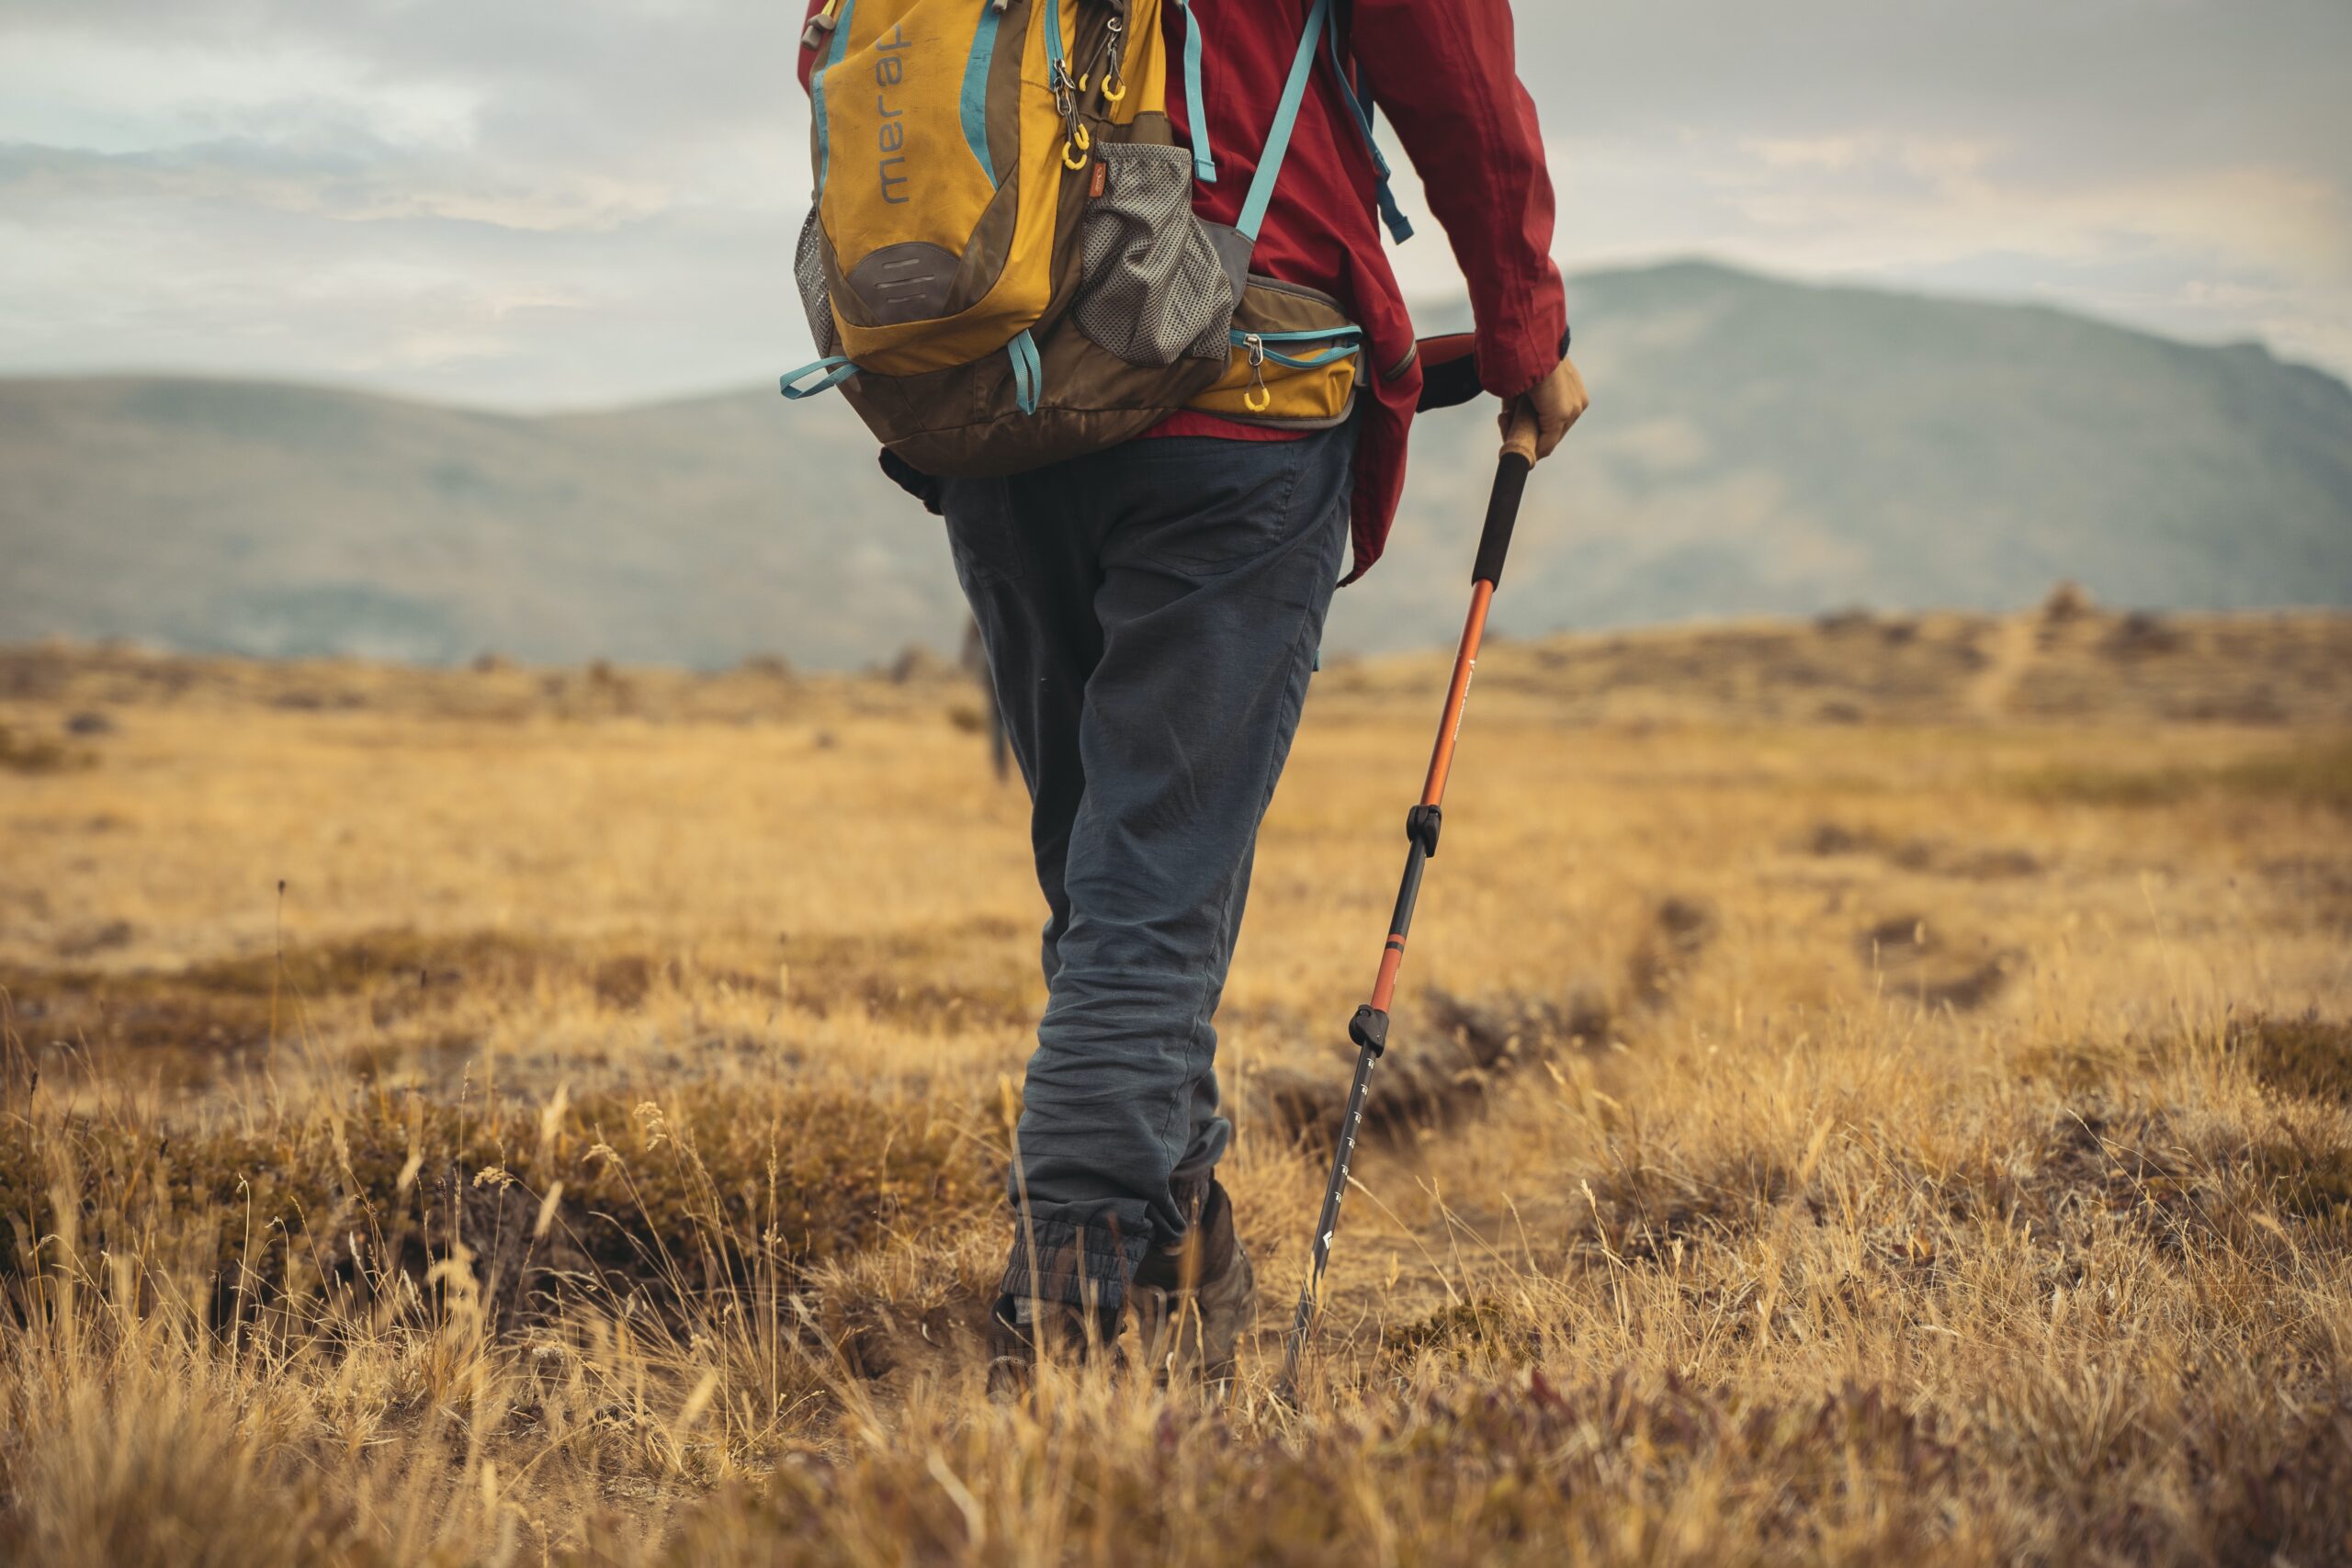 How to use walking poles. A mid-shot of someone walking with walking poles. Photo by Colby Winfield on Unsplash